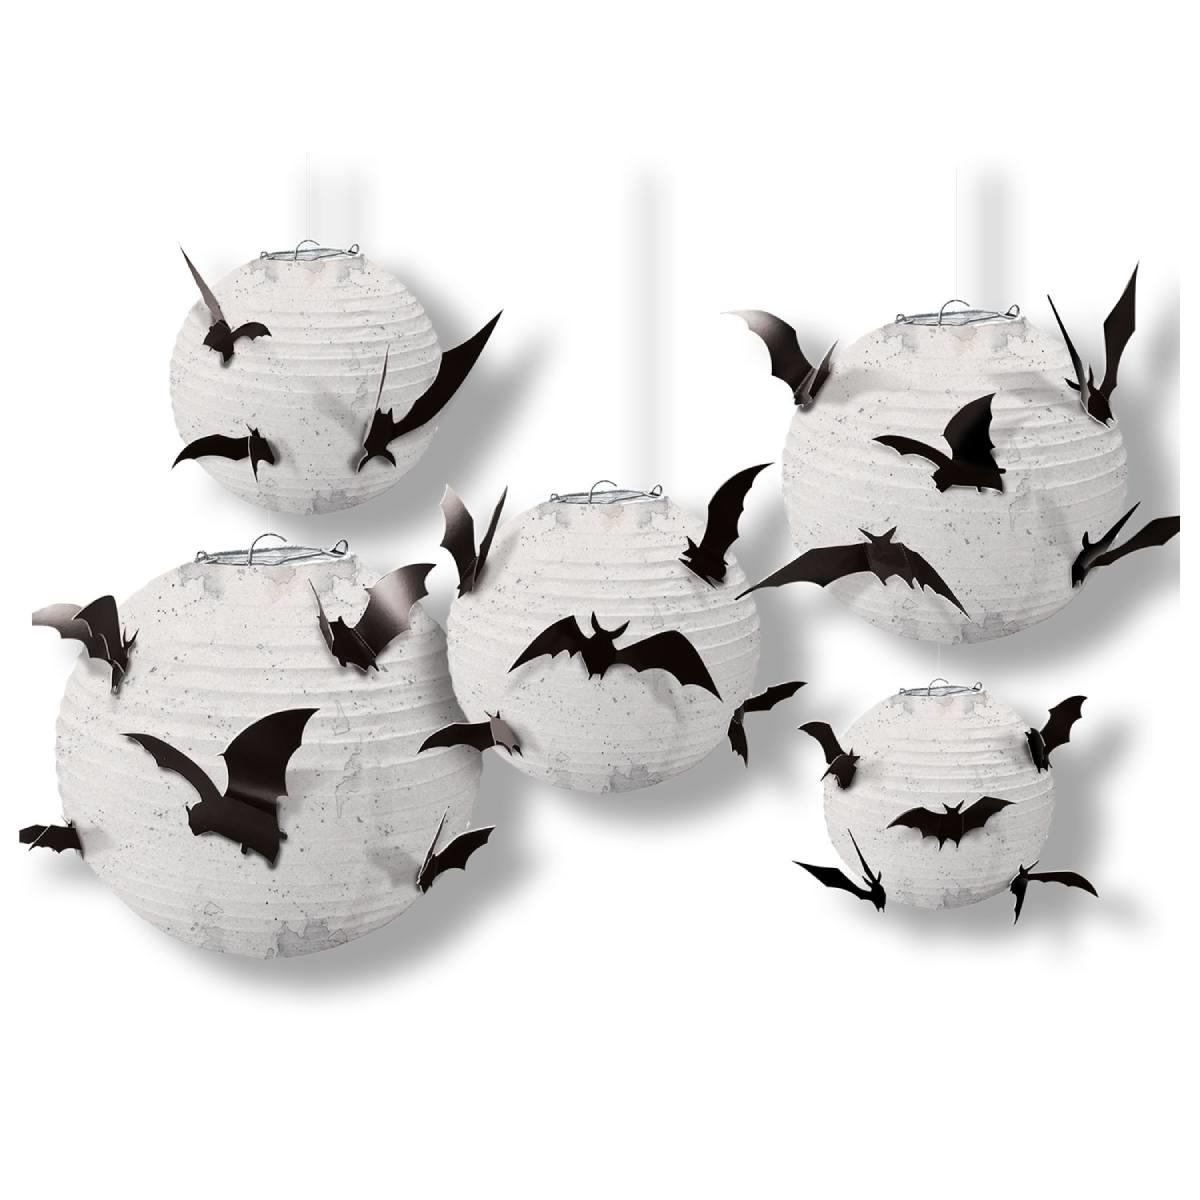 Halloween Paper Lanterns with Black Bats pk5 assorted sizes by Amscan 244164 available here at Karnival Costumes online Halloween party shop